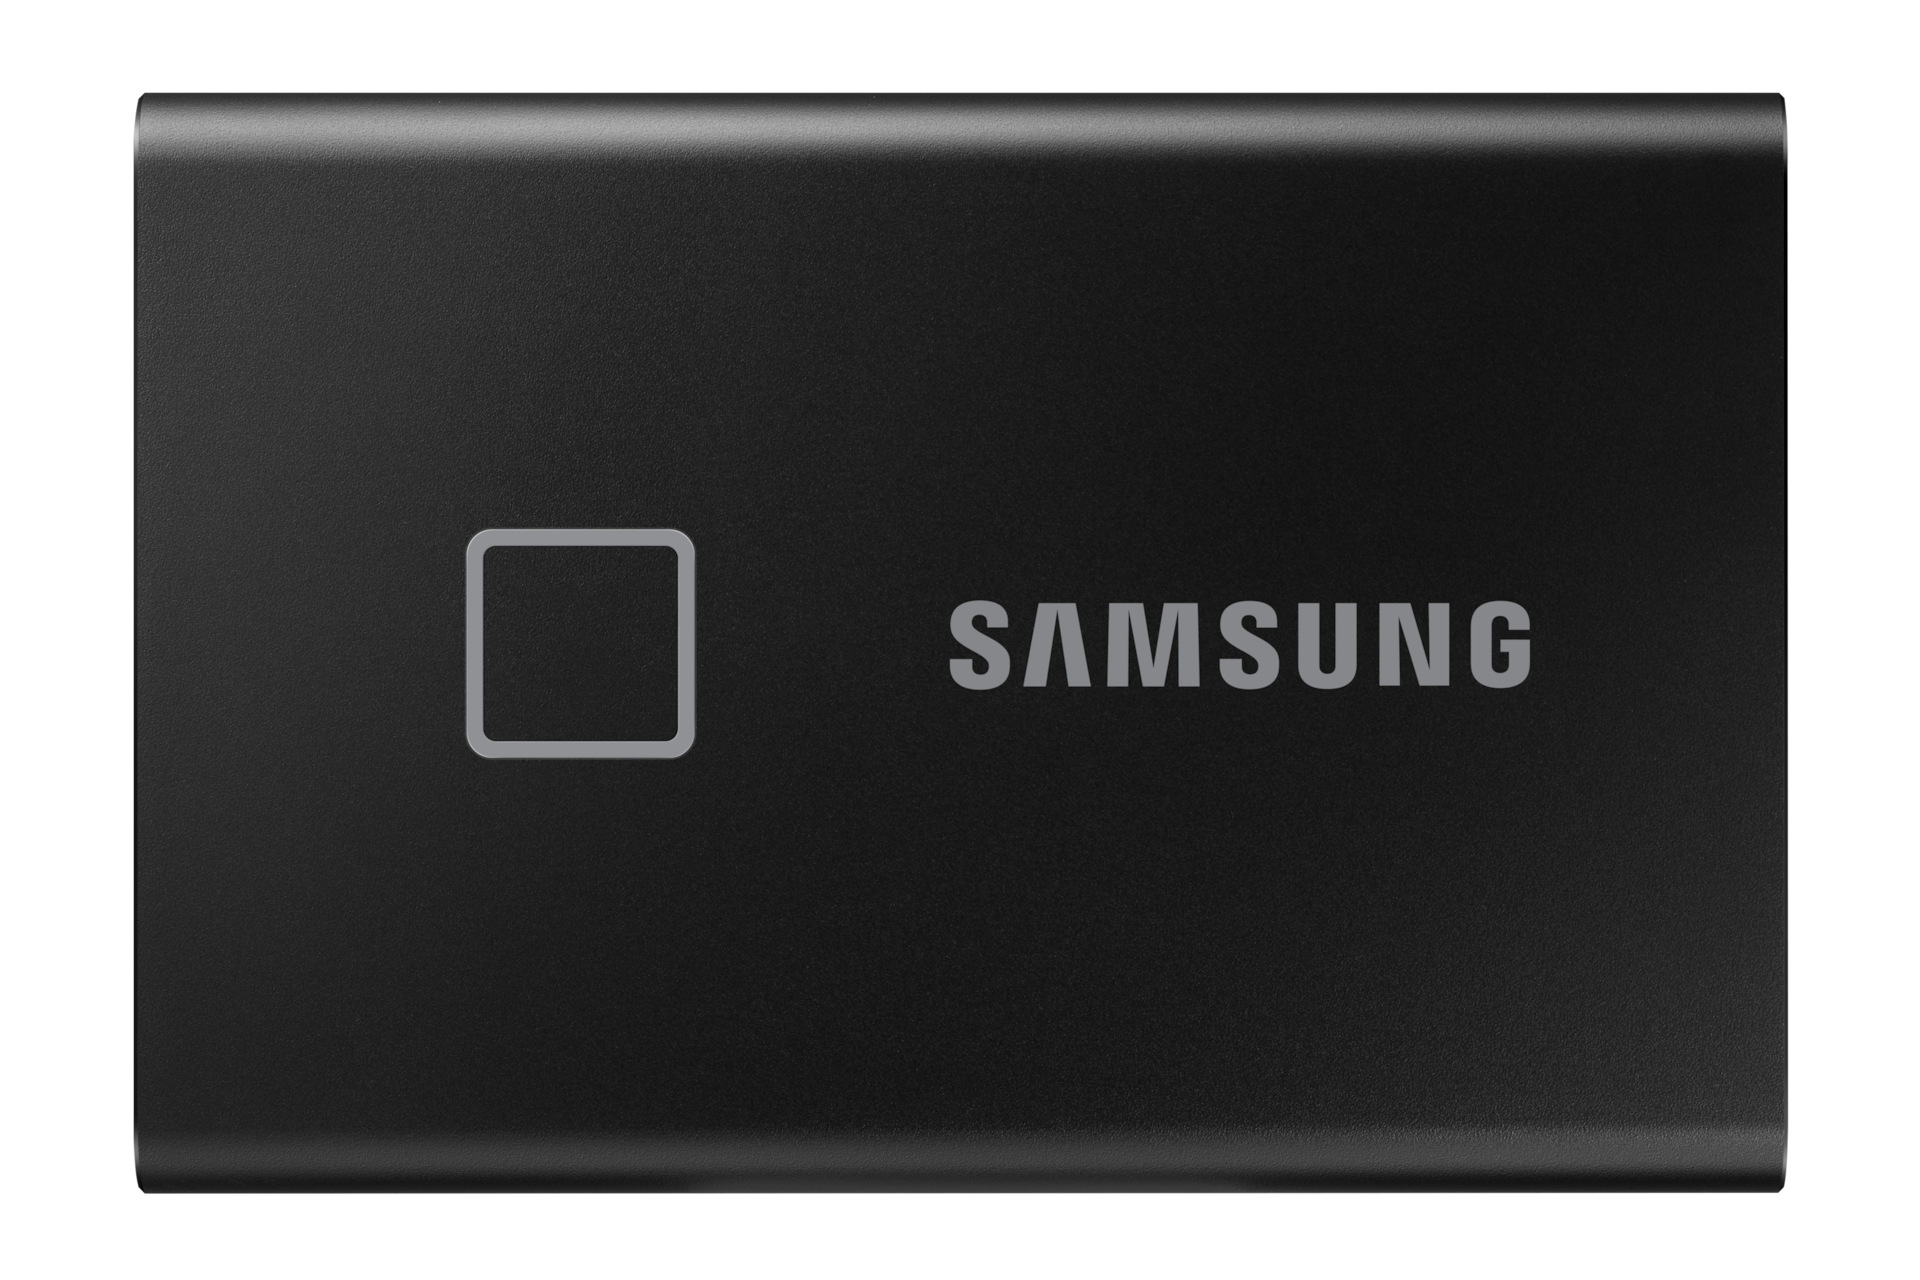 https://images.samsung.com/is/image/samsung/de-portable-ssd-t7-touch-mu-pc1t0k-ww-frontblack-203521907?$650_519_PNG$